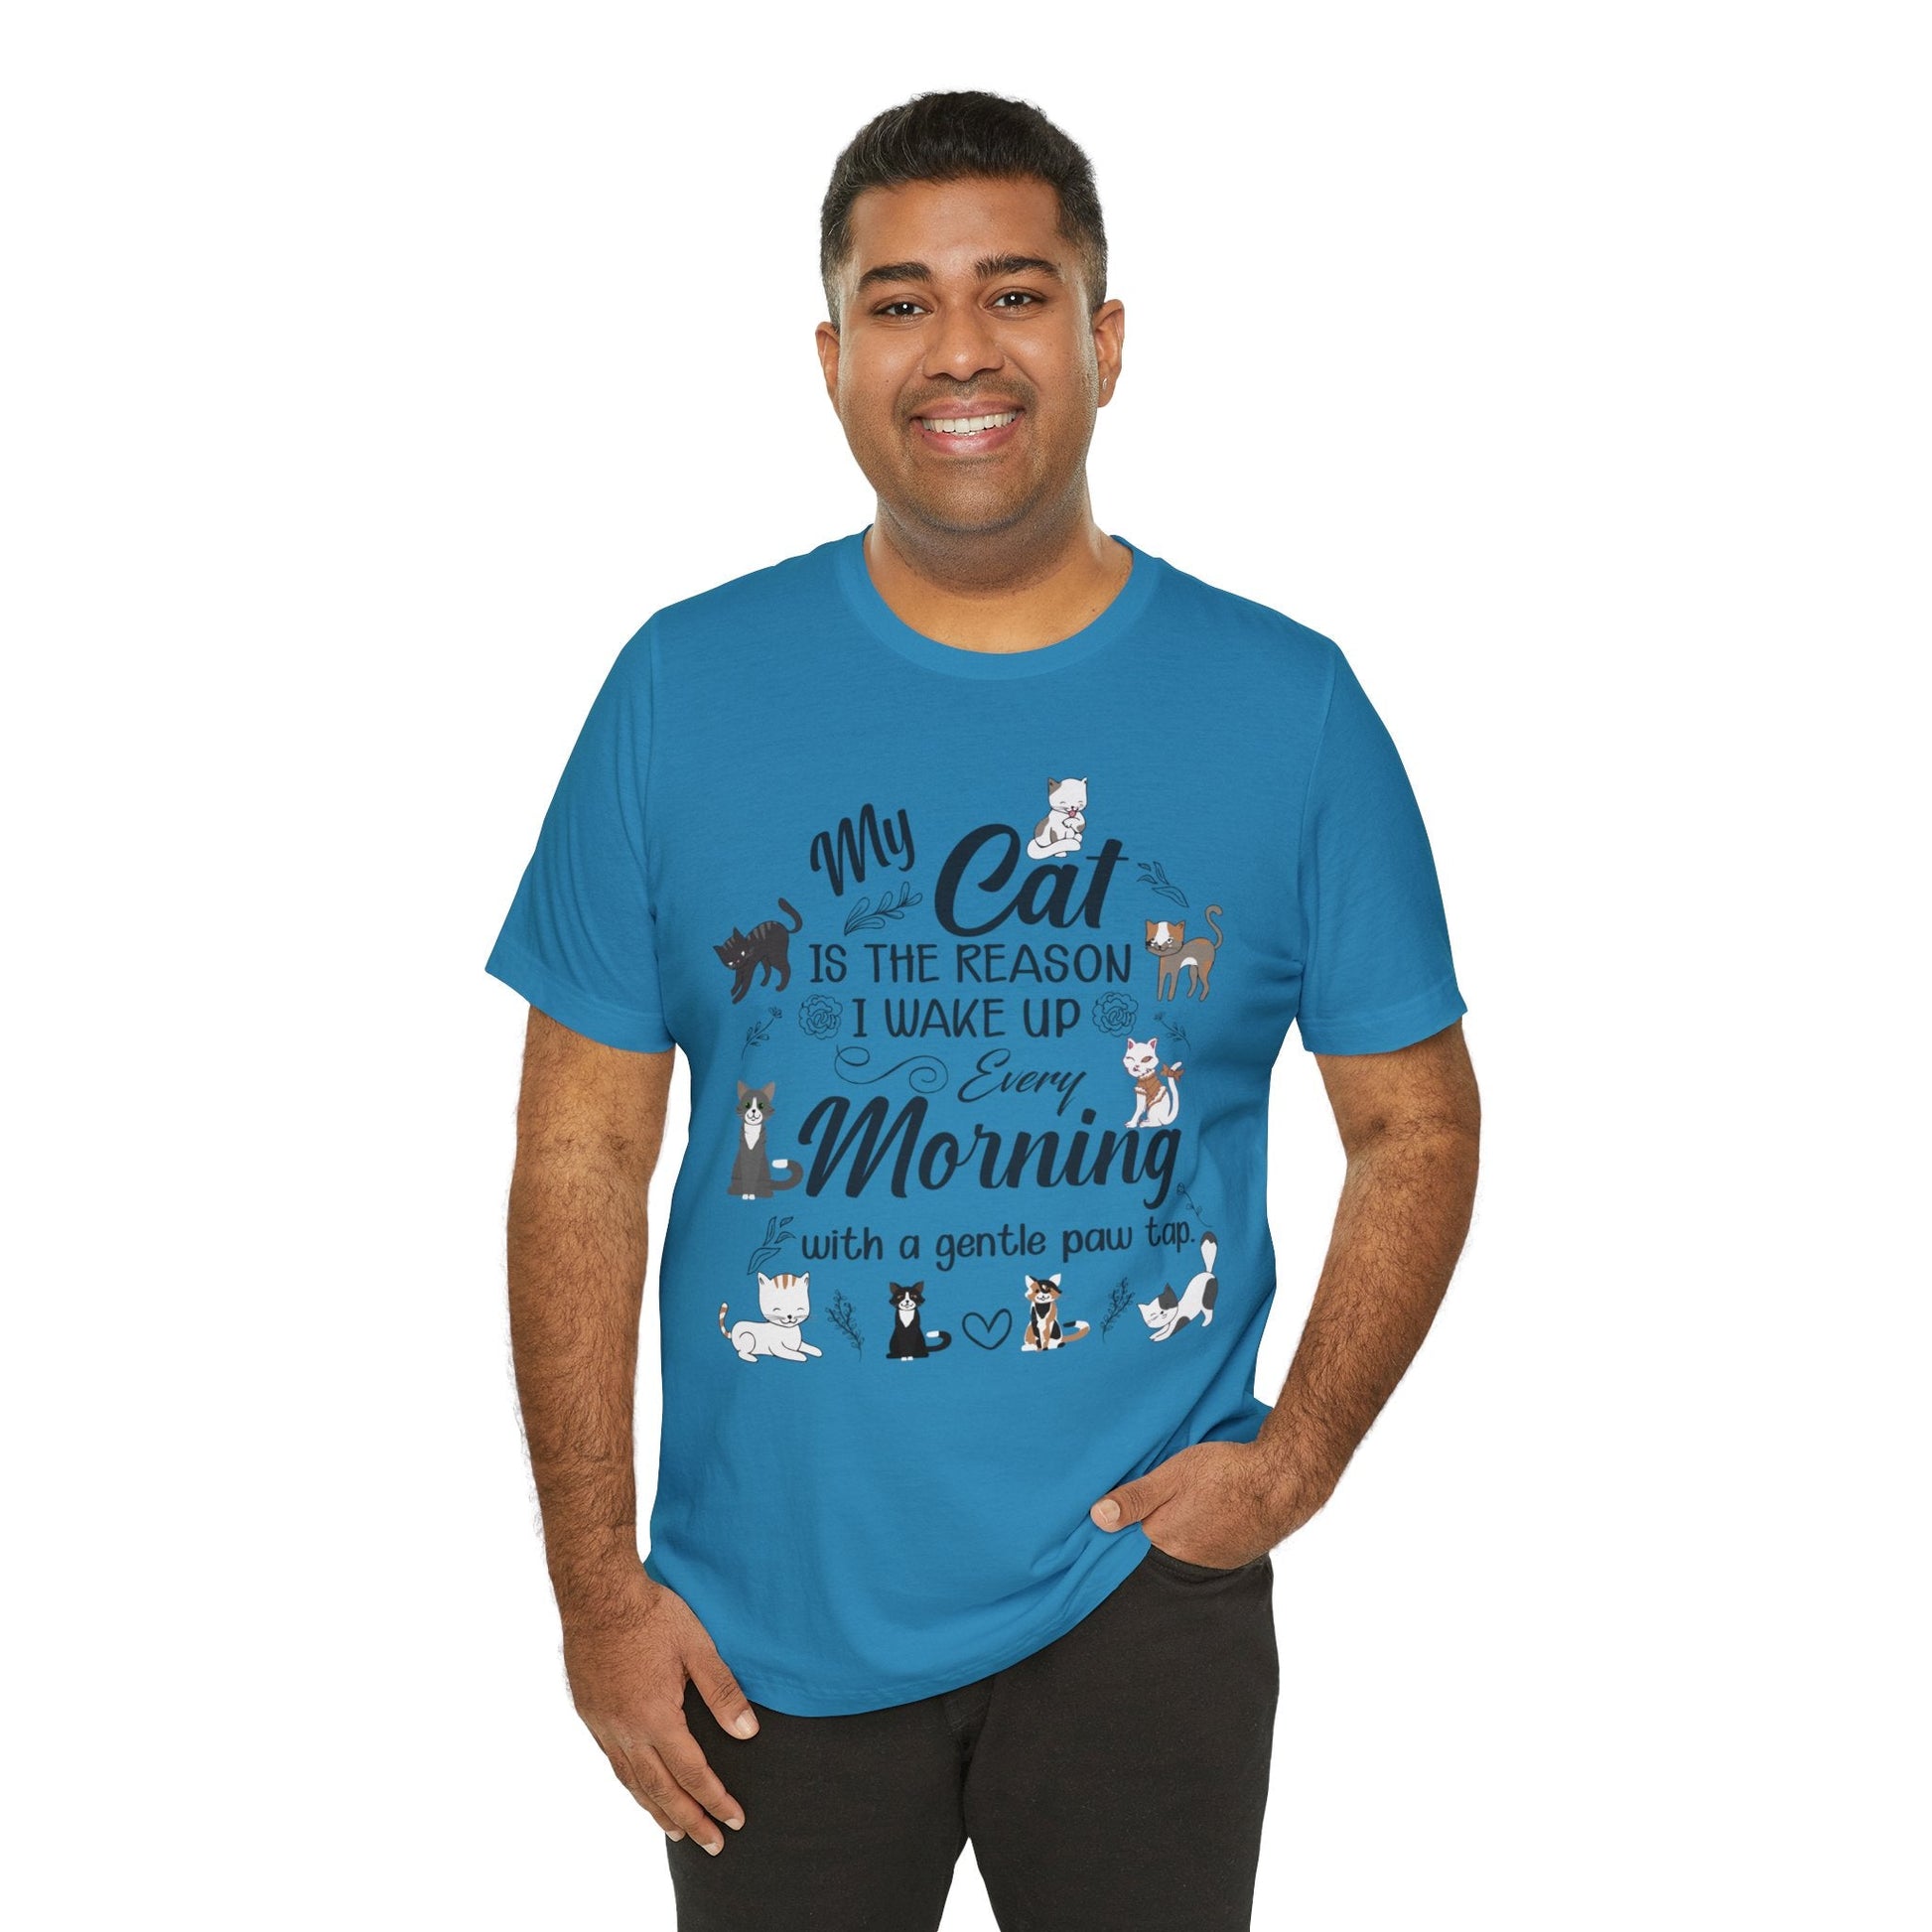 My cat is the reason I wake up every morning with a gentle paw tap. T-shirt - InkArt Fashions